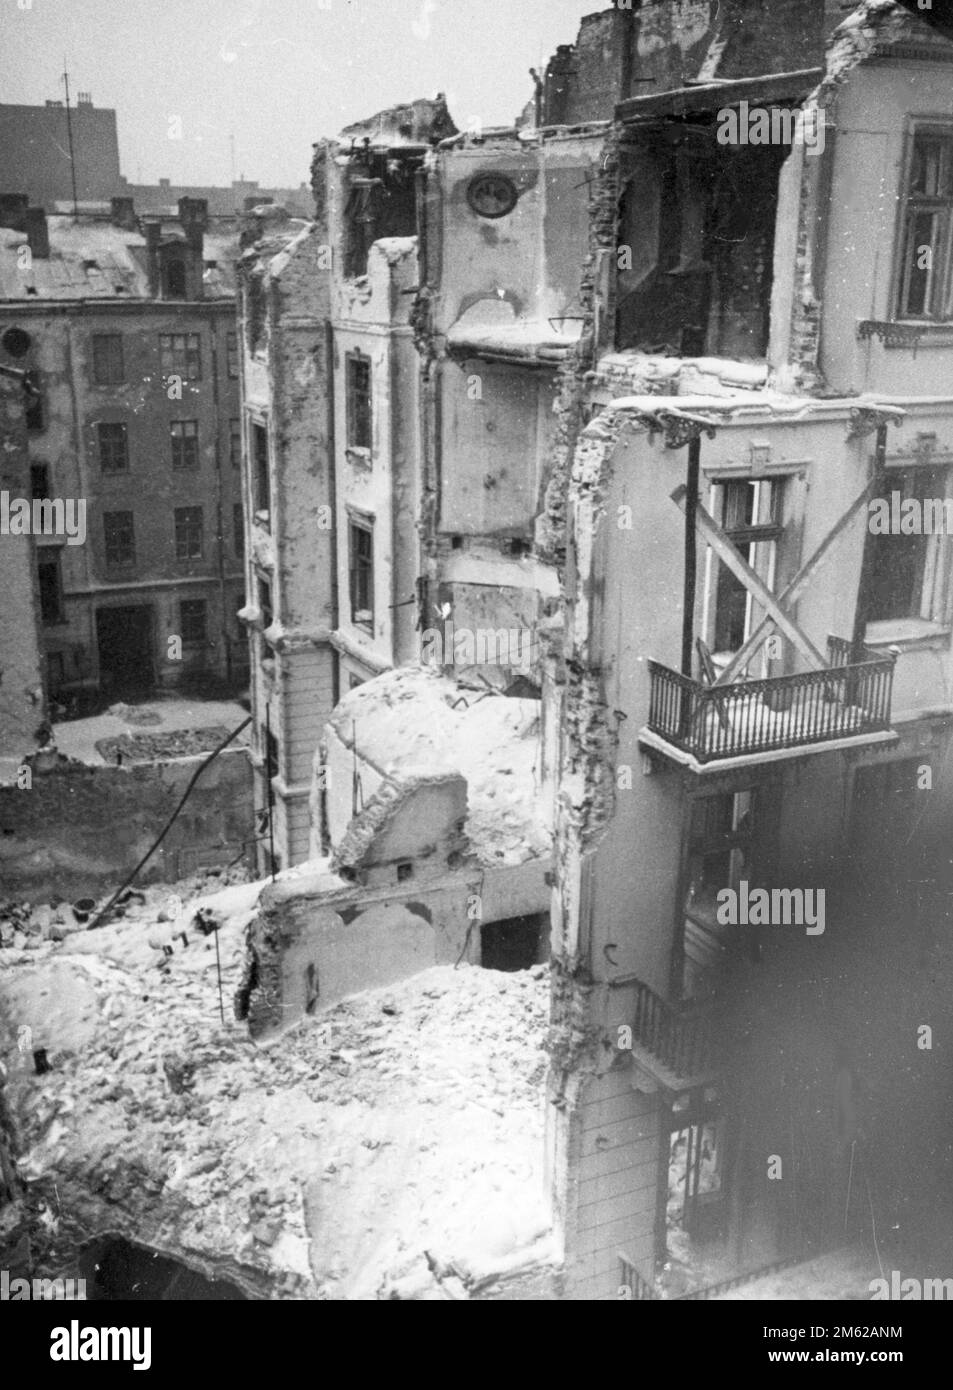 View from a window over the ruins of Warsaw after the German invasion in 1939. Stock Photo